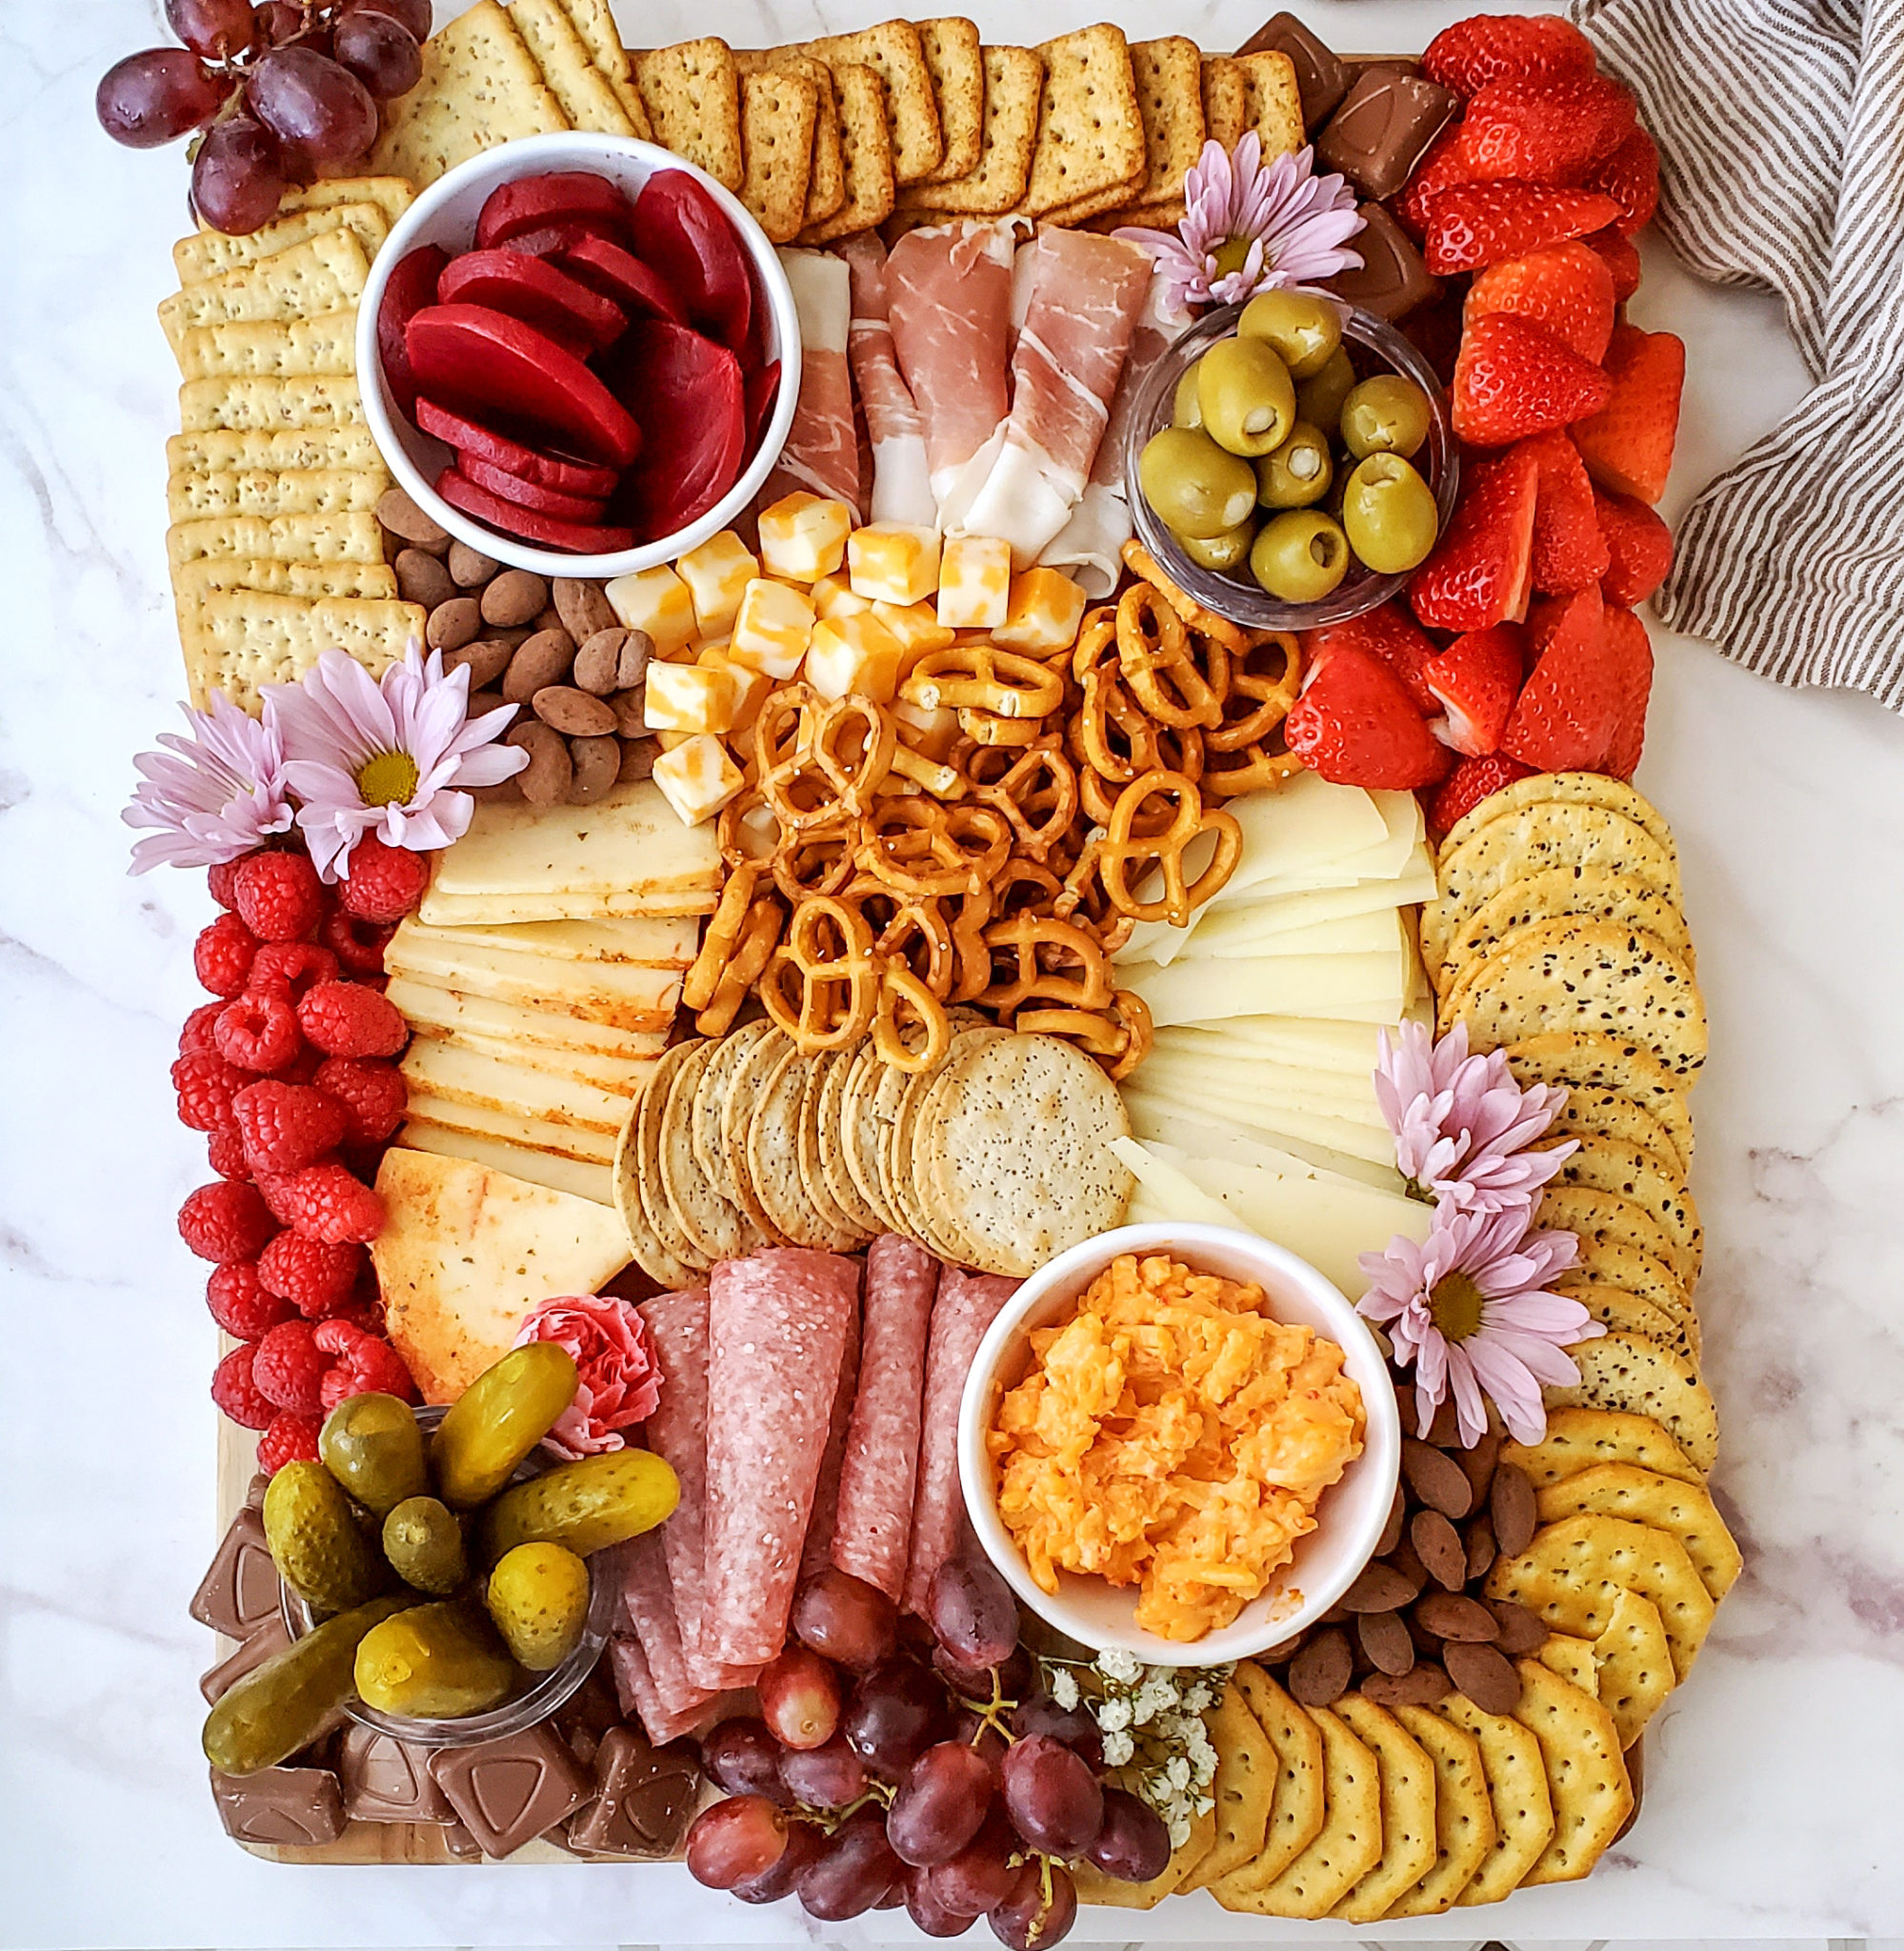 How to Make a Charcuterie Board (VIDEO) 